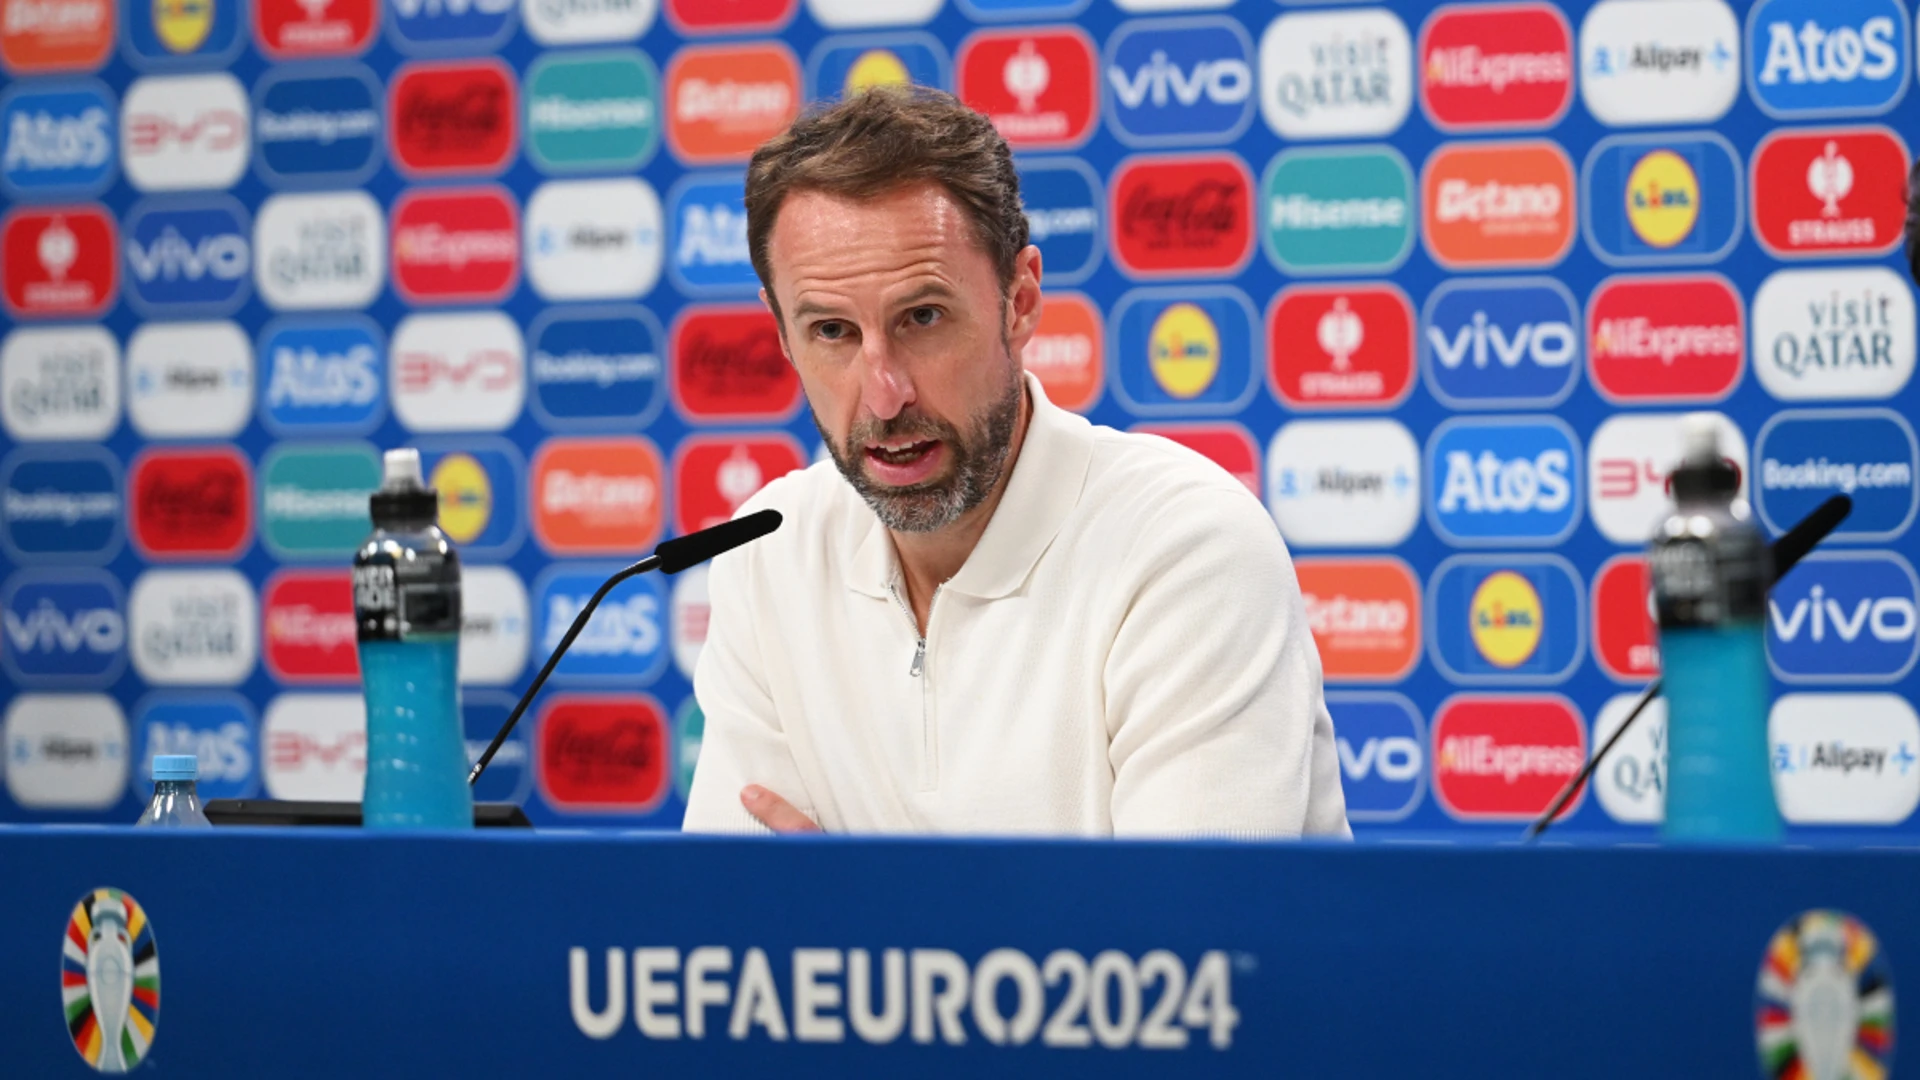 England have disappointed but more to come - Southgate